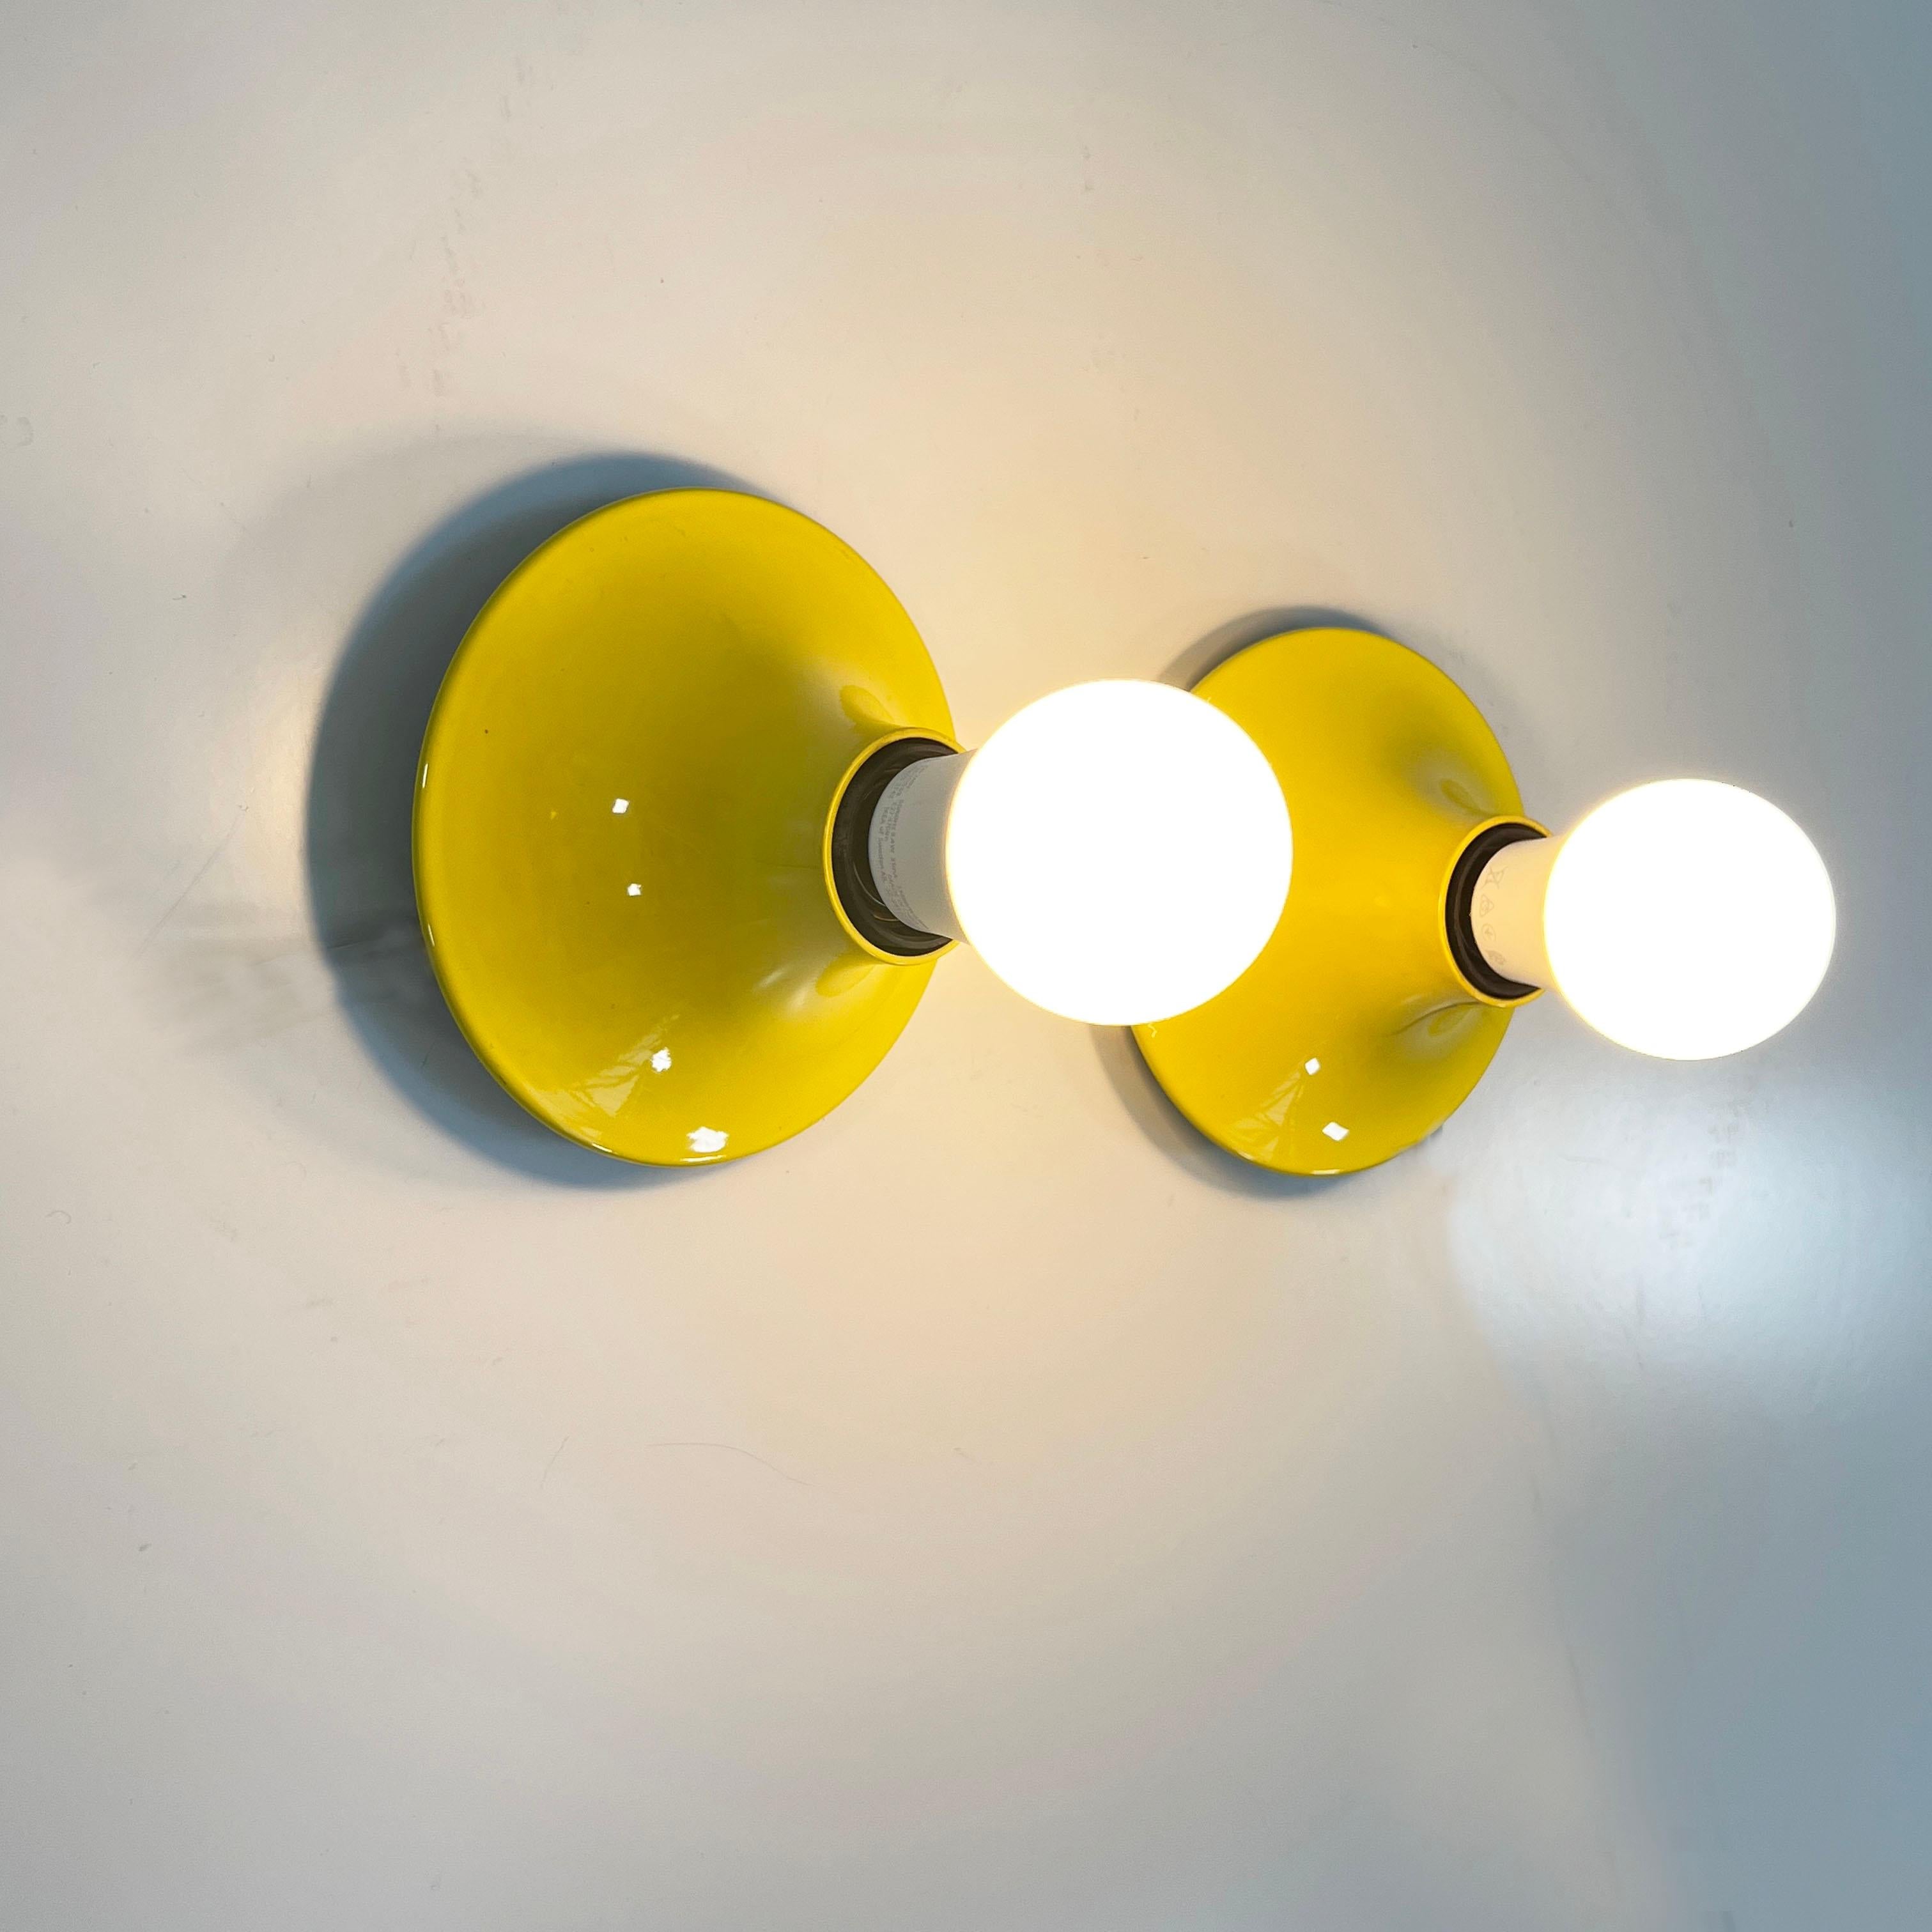 Italian Pair of Yellow Teti Wall Lamps by Vico Magistretti for Artemide, 1970s